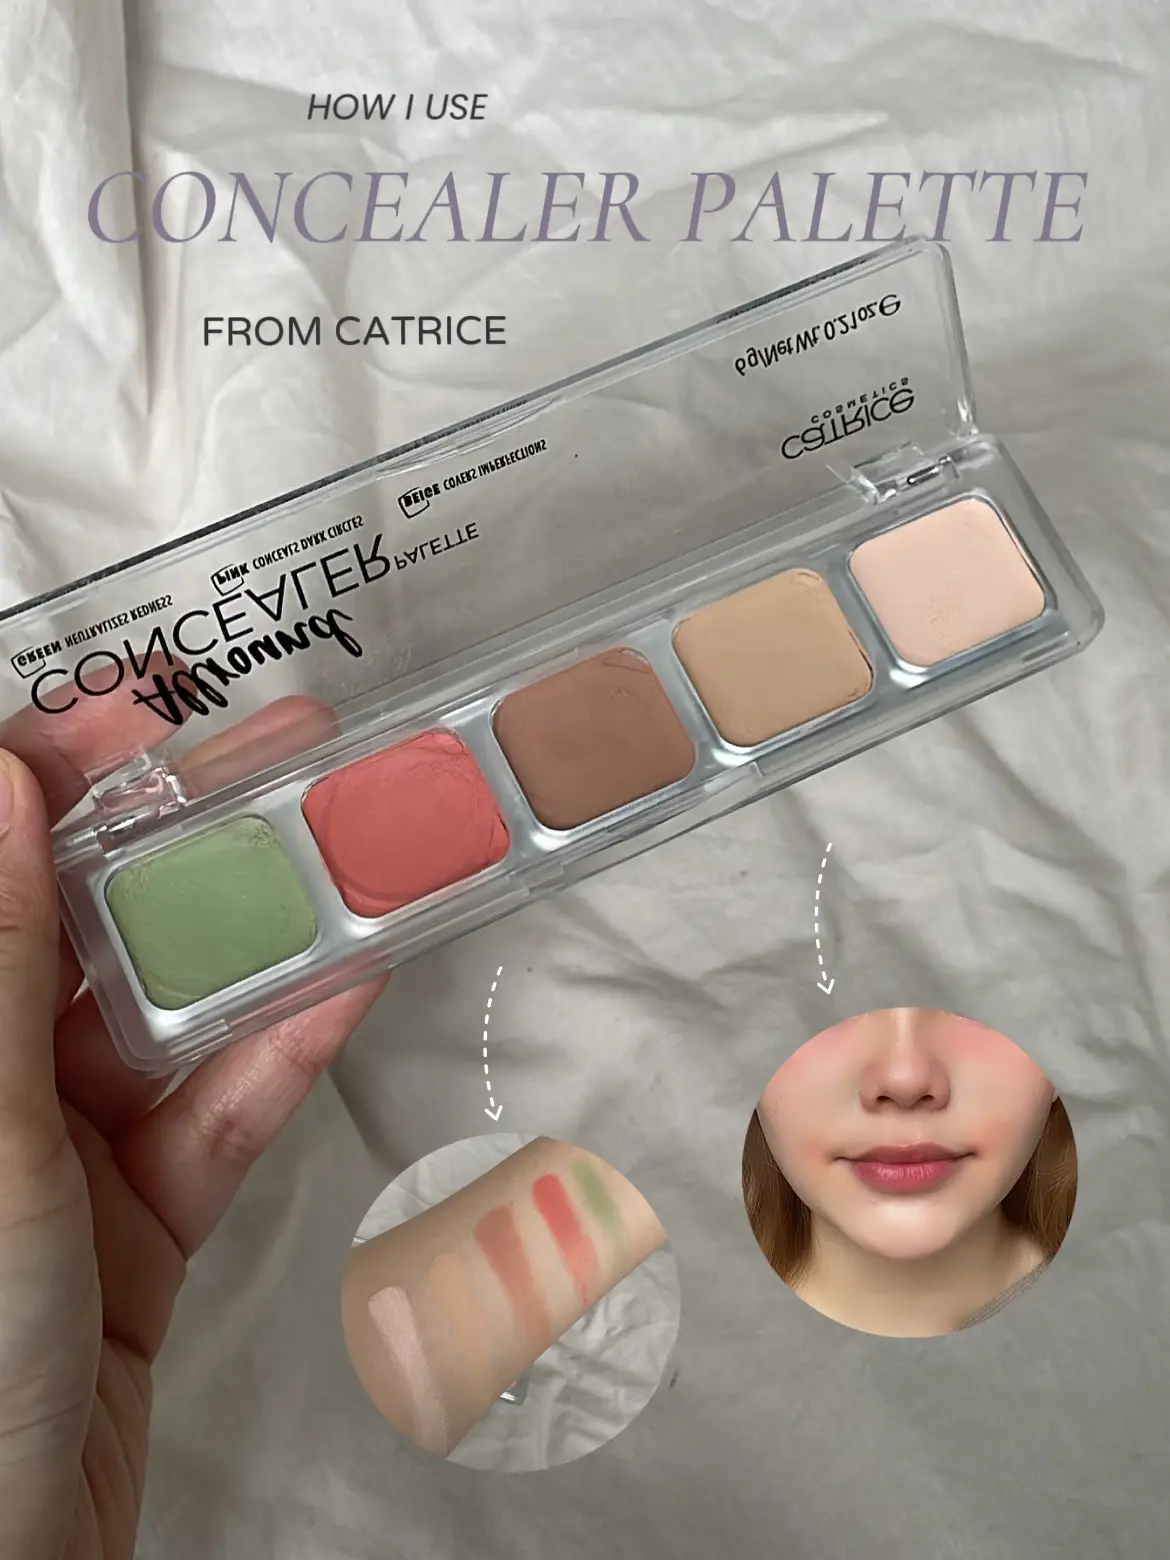 makker Automatisering Uplifted TRYING CONCEALER PALETTE FROM CATRICE 🎨 | Gallery posted by Nurha ✨ |  Lemon8